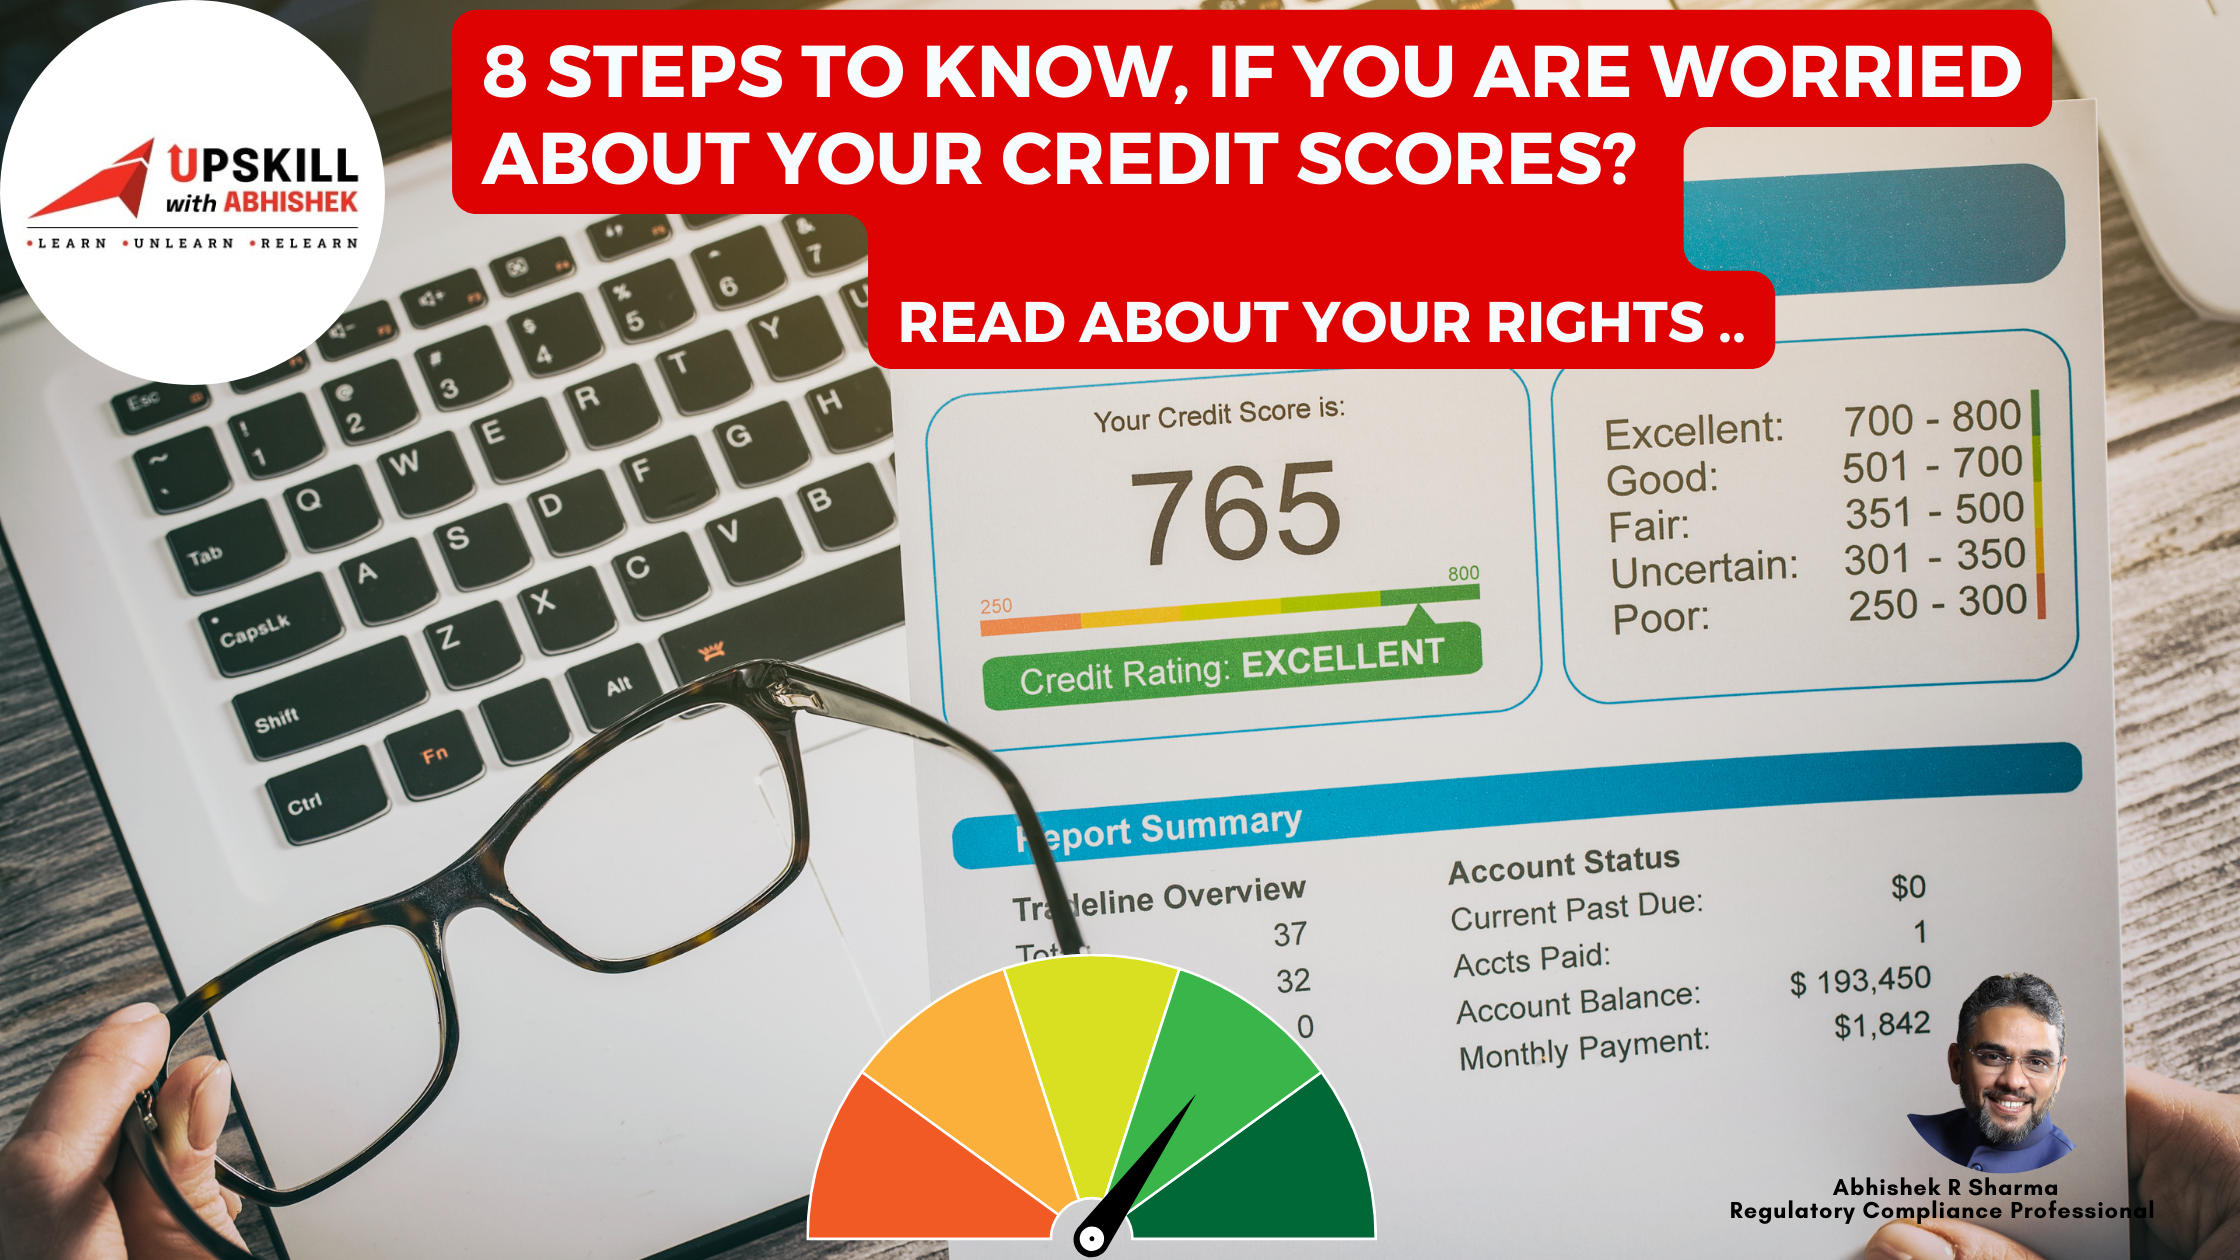 8 steps to know, if you are worried about your credit scores? Read about your rights ..